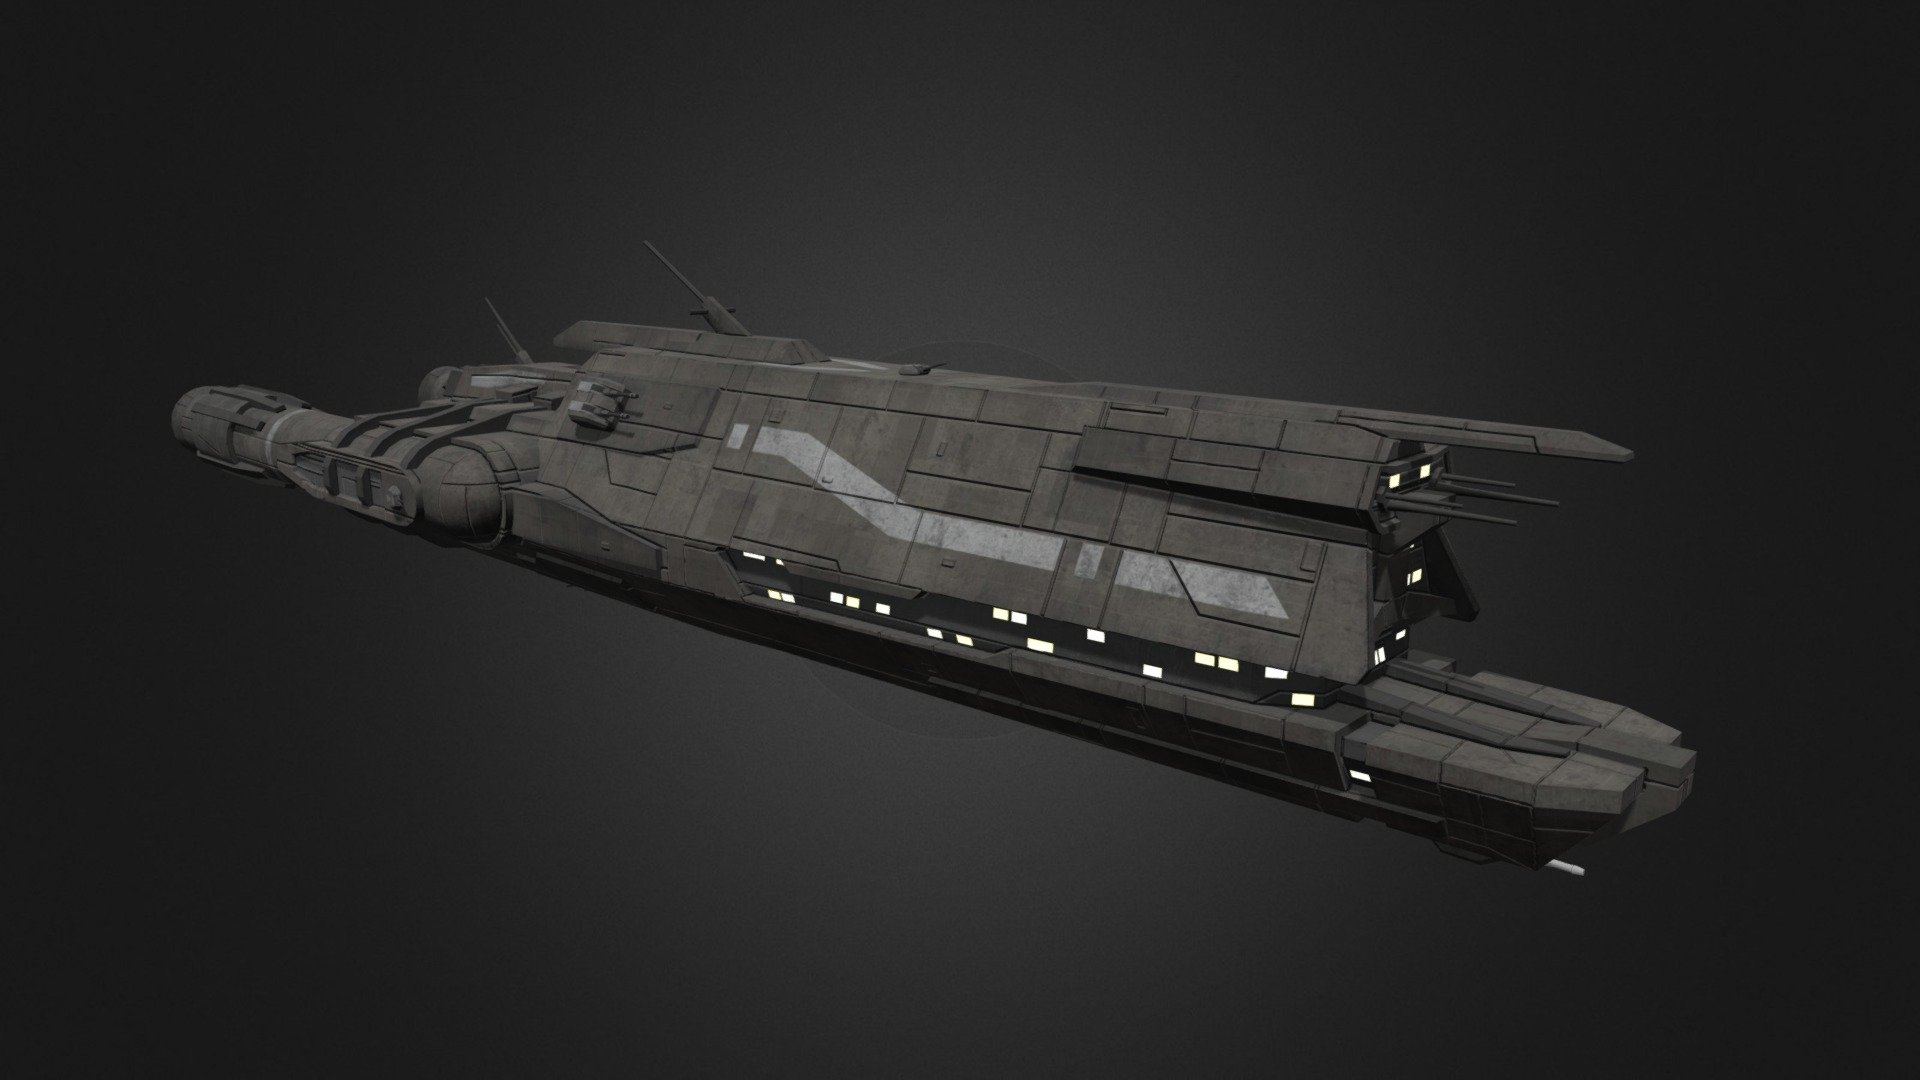 My rendition of the Bulwark Class Support Frigate, for a star wars mod. Please do not use in other Star wars Empire at War Mods.

The ship is armed with: 2 Dual Light Turbo Laser Turrets, 1 Ion Turret, and 4 Dual Laser Turrets 3d model